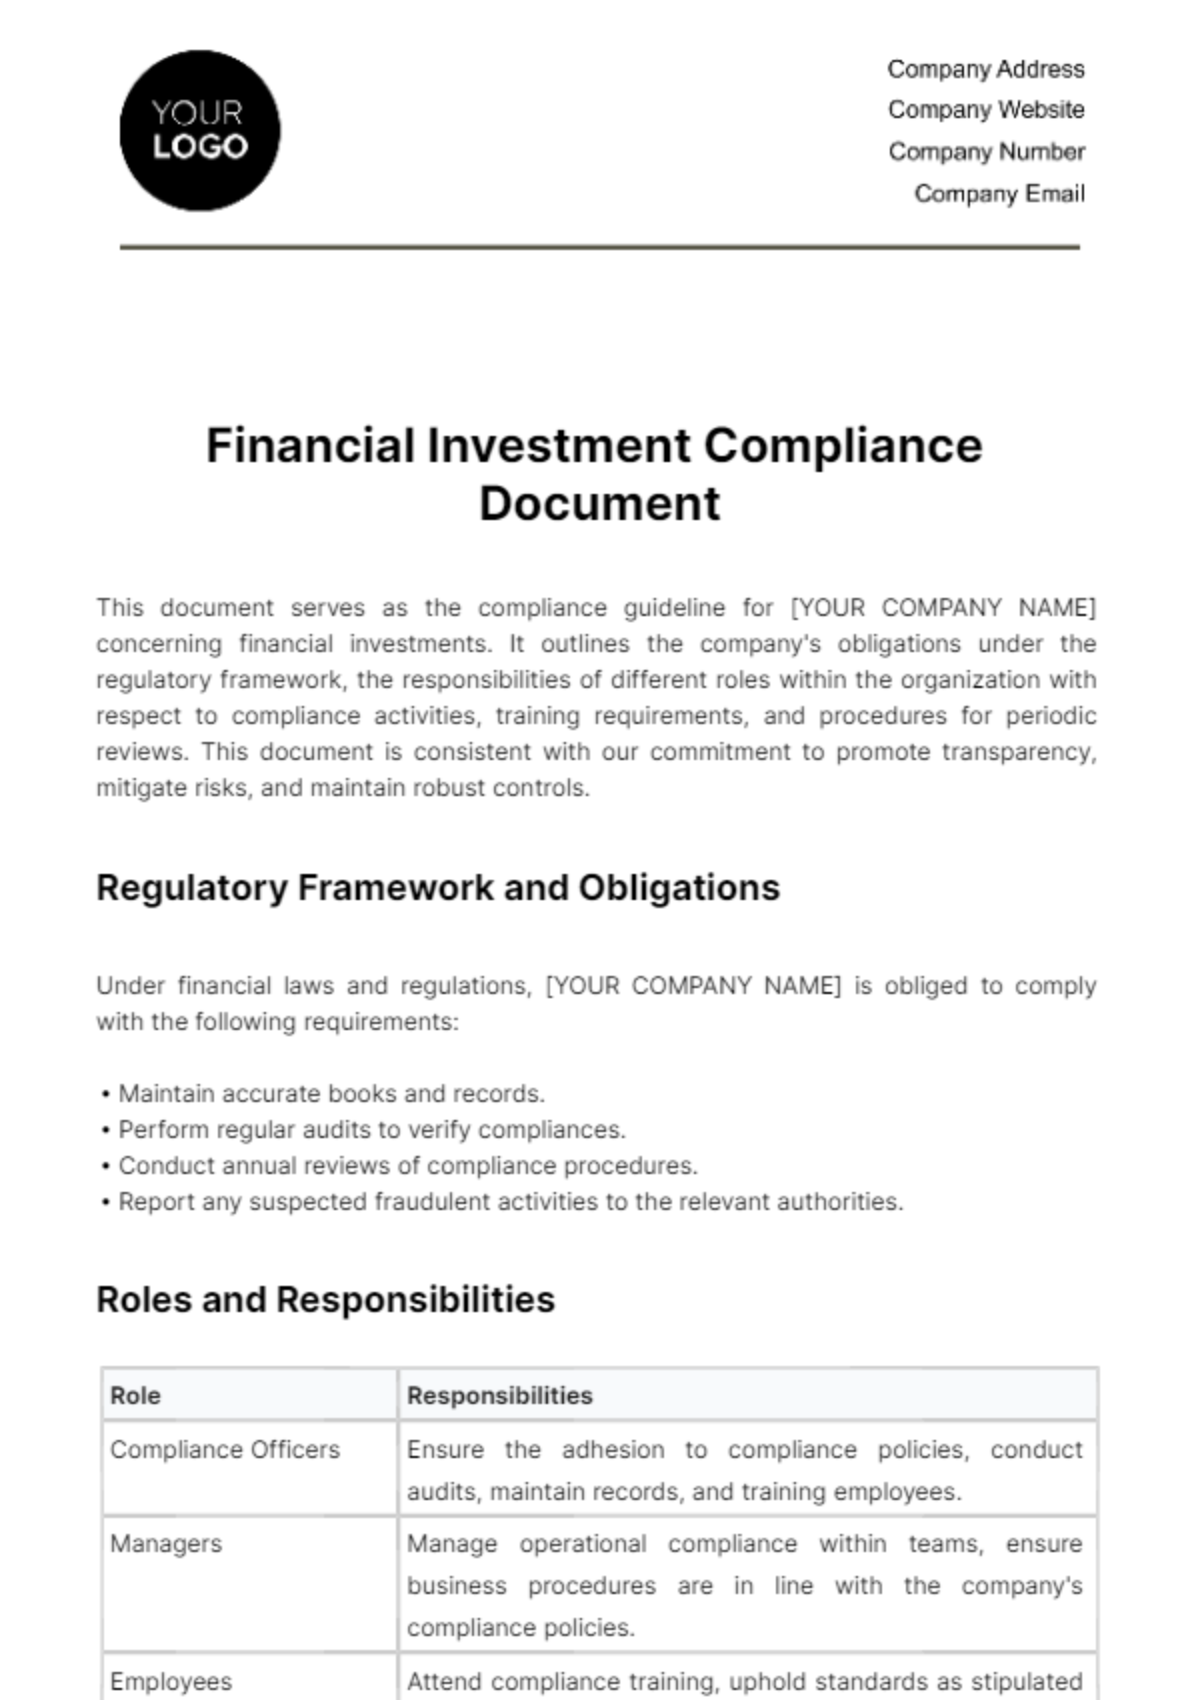 Free Financial Investment Compliance Document Template